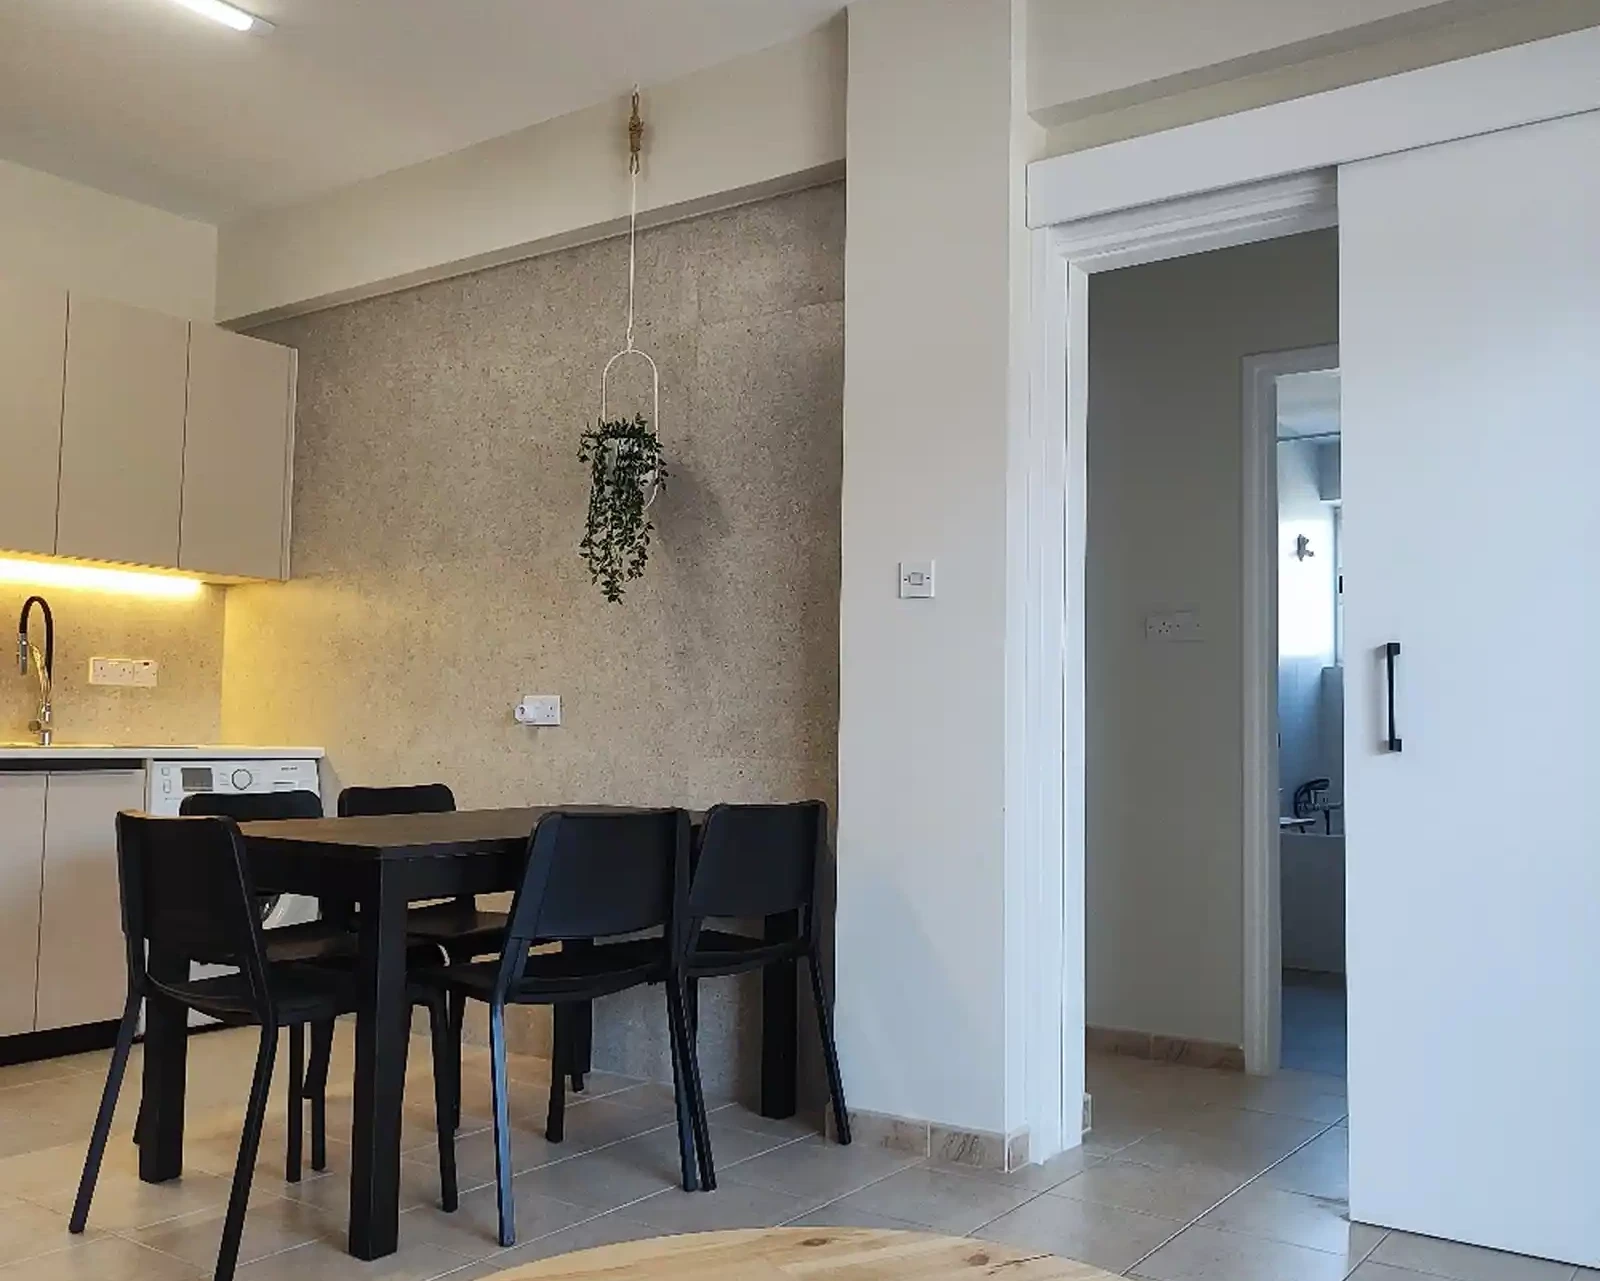 3-bedroom apartment to rent €1.550, image 1